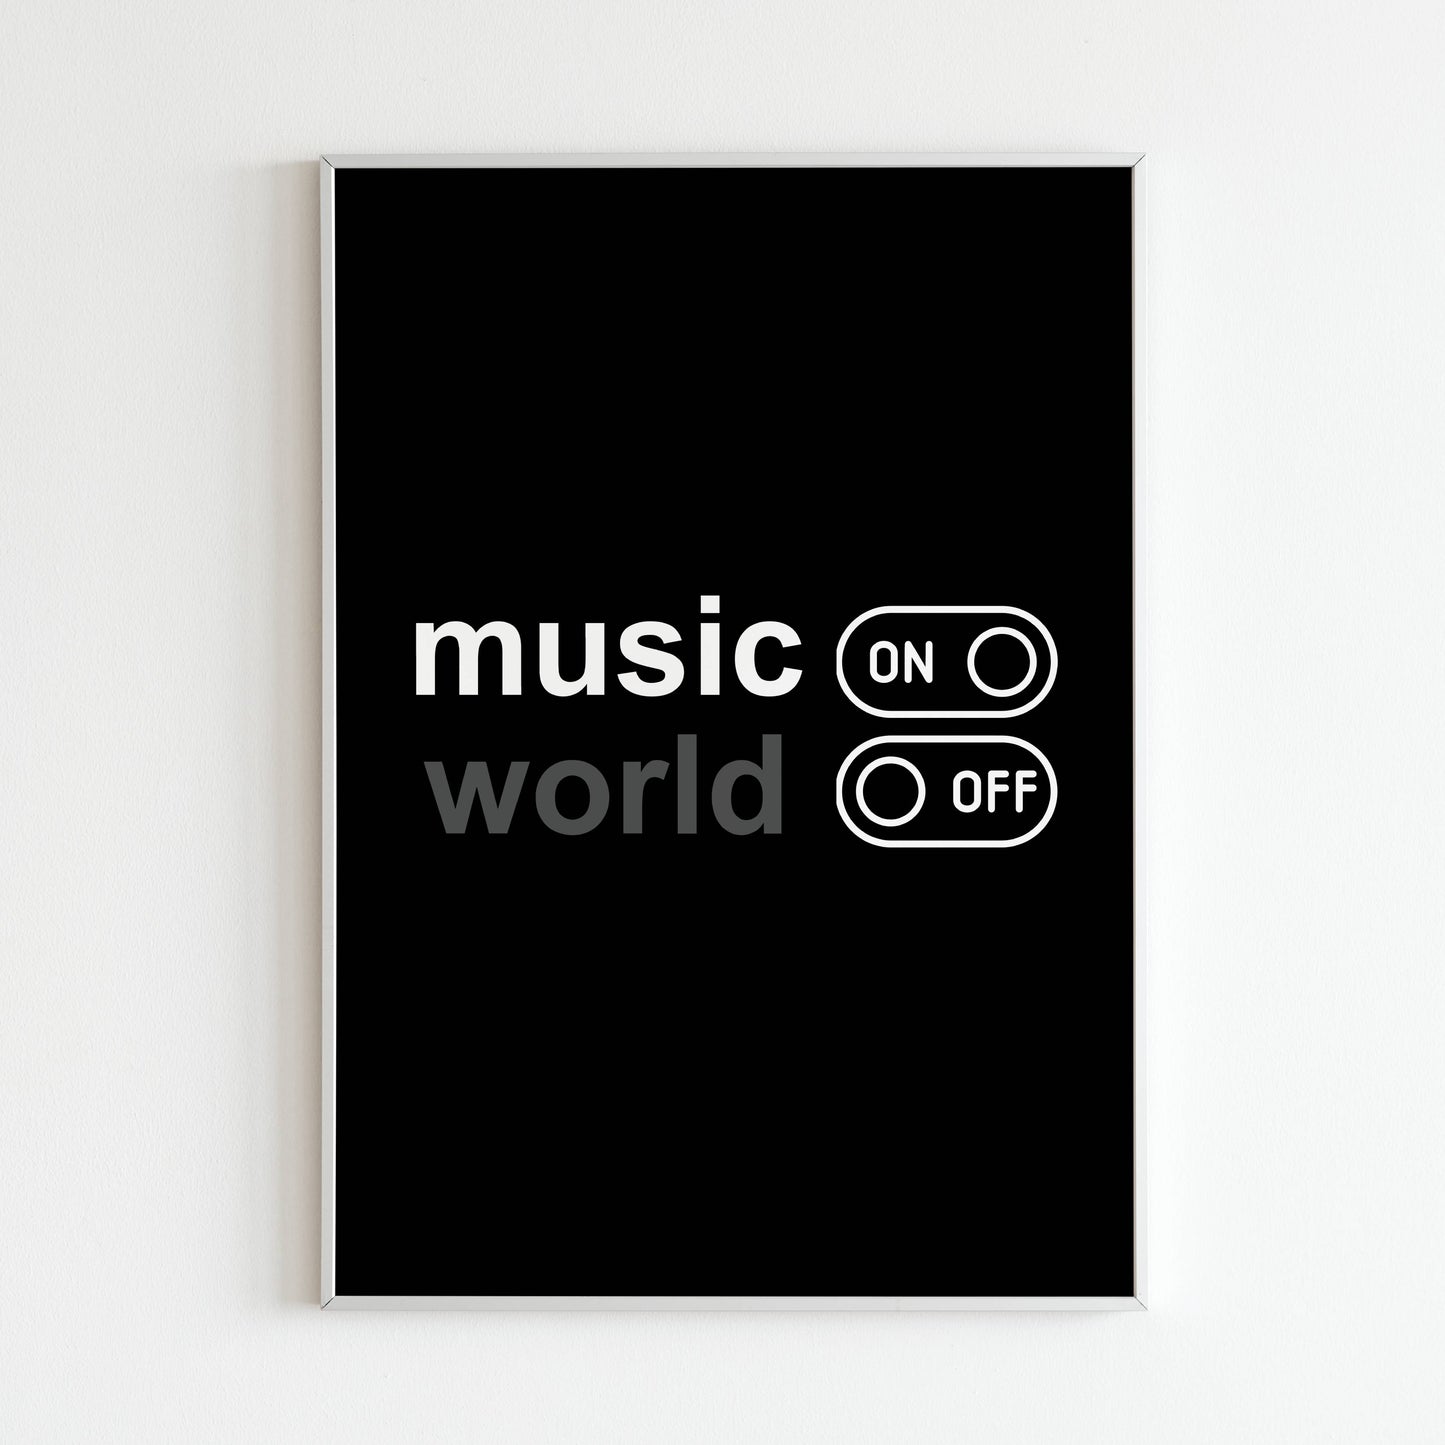 "Music ON World OFF" - Printed Wall Art / Poster. Let this vibrant poster showcase your passion for music. Arrives ready to hang.